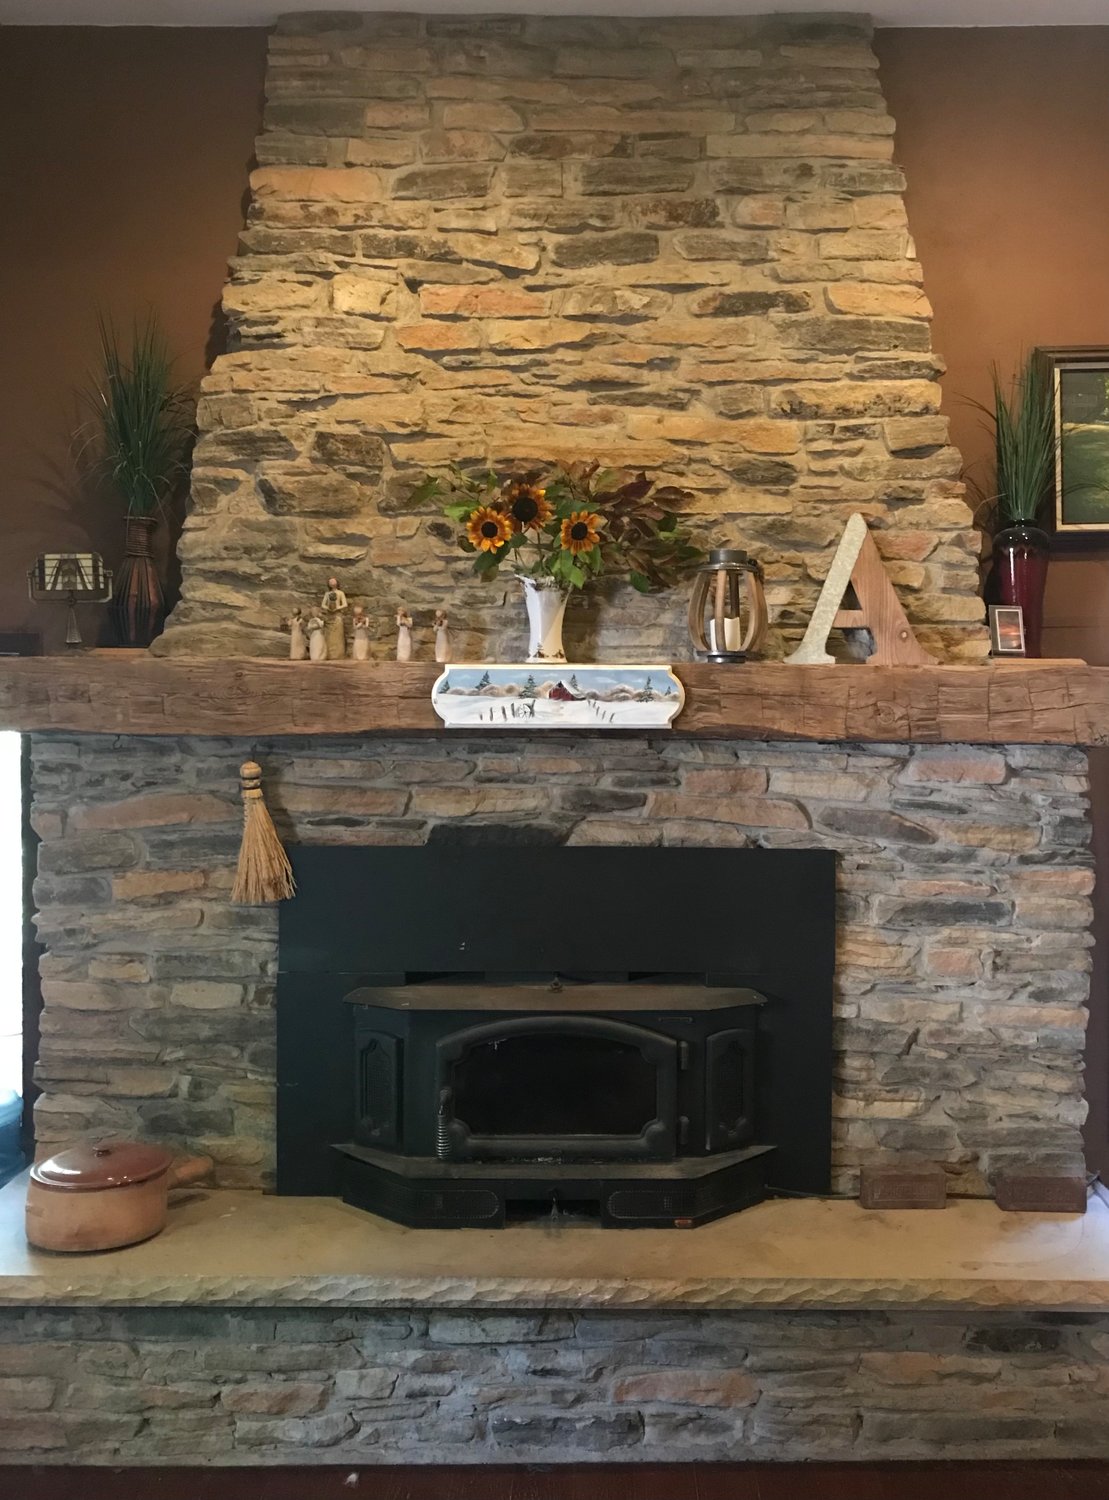 Accessorize your fireplace with country touches.